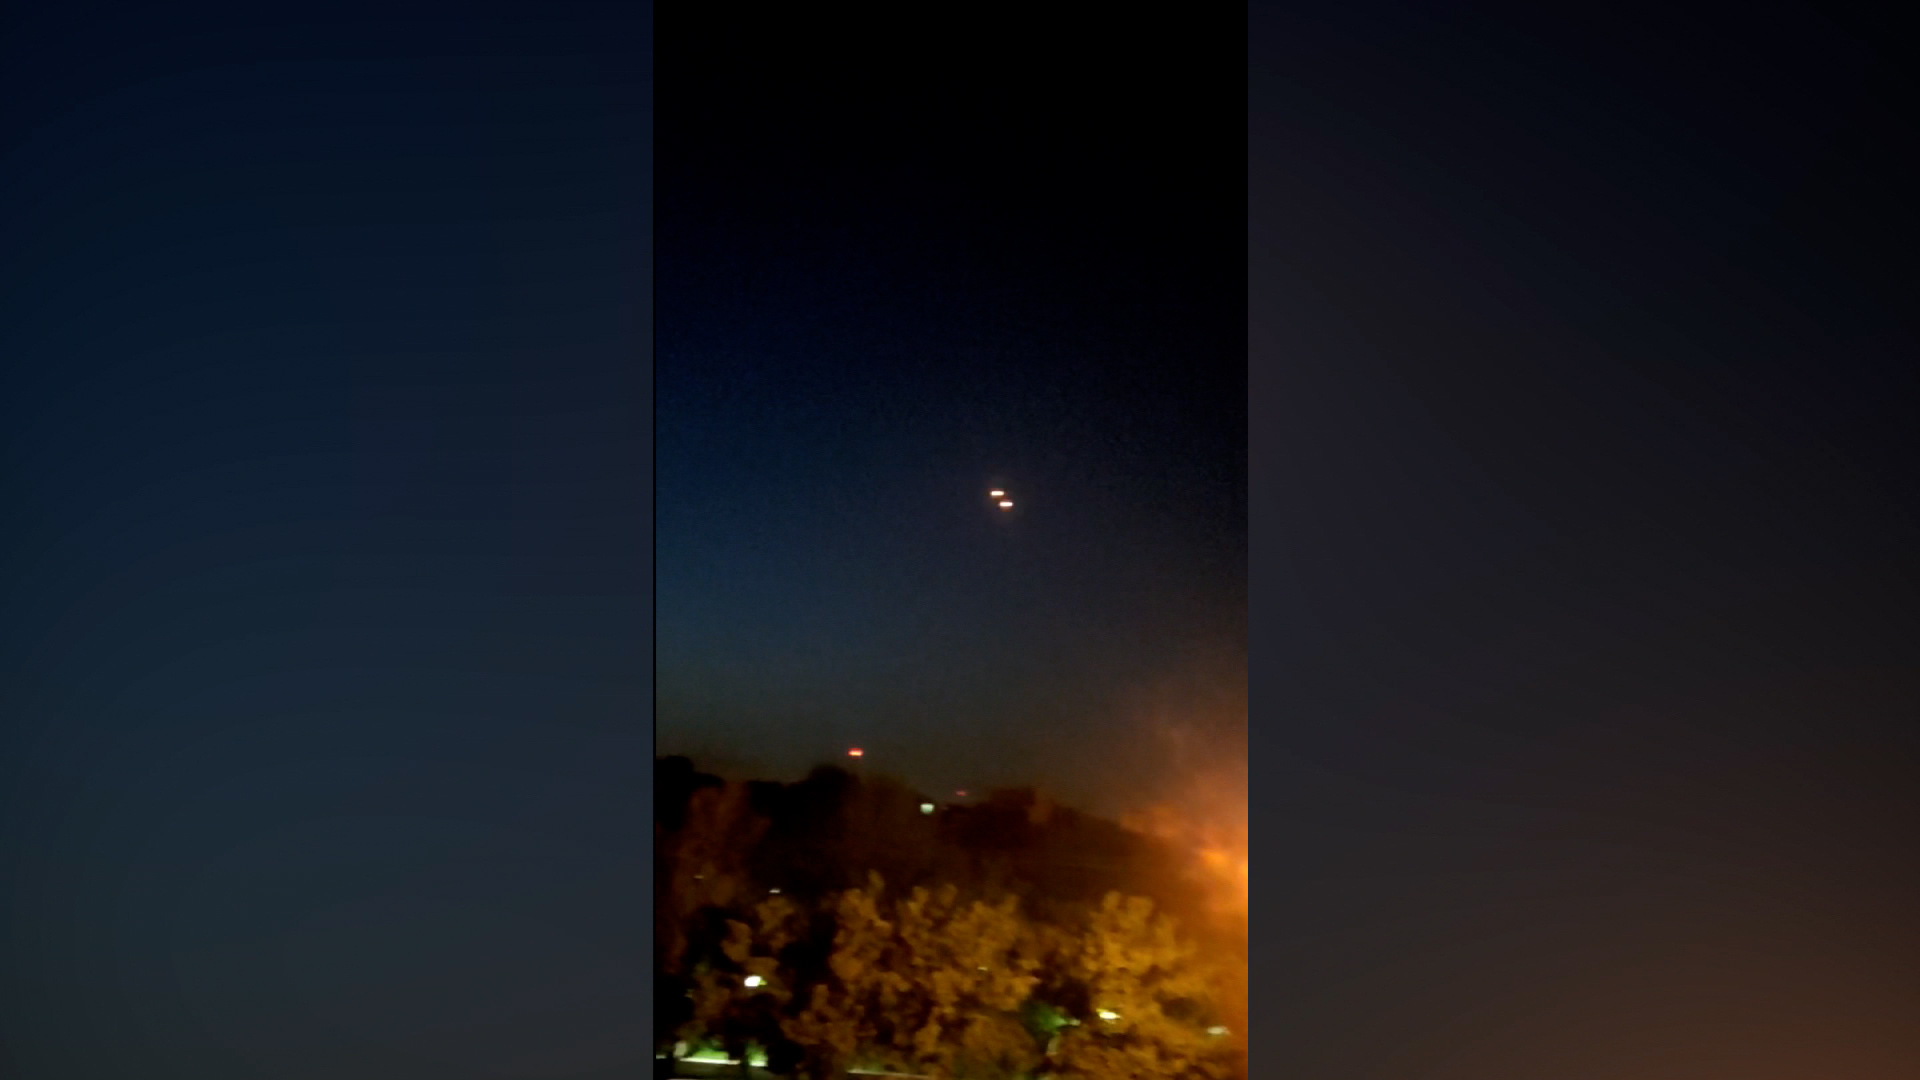 Flashes in the sky of Isfahan, Iran following reports of explosions.